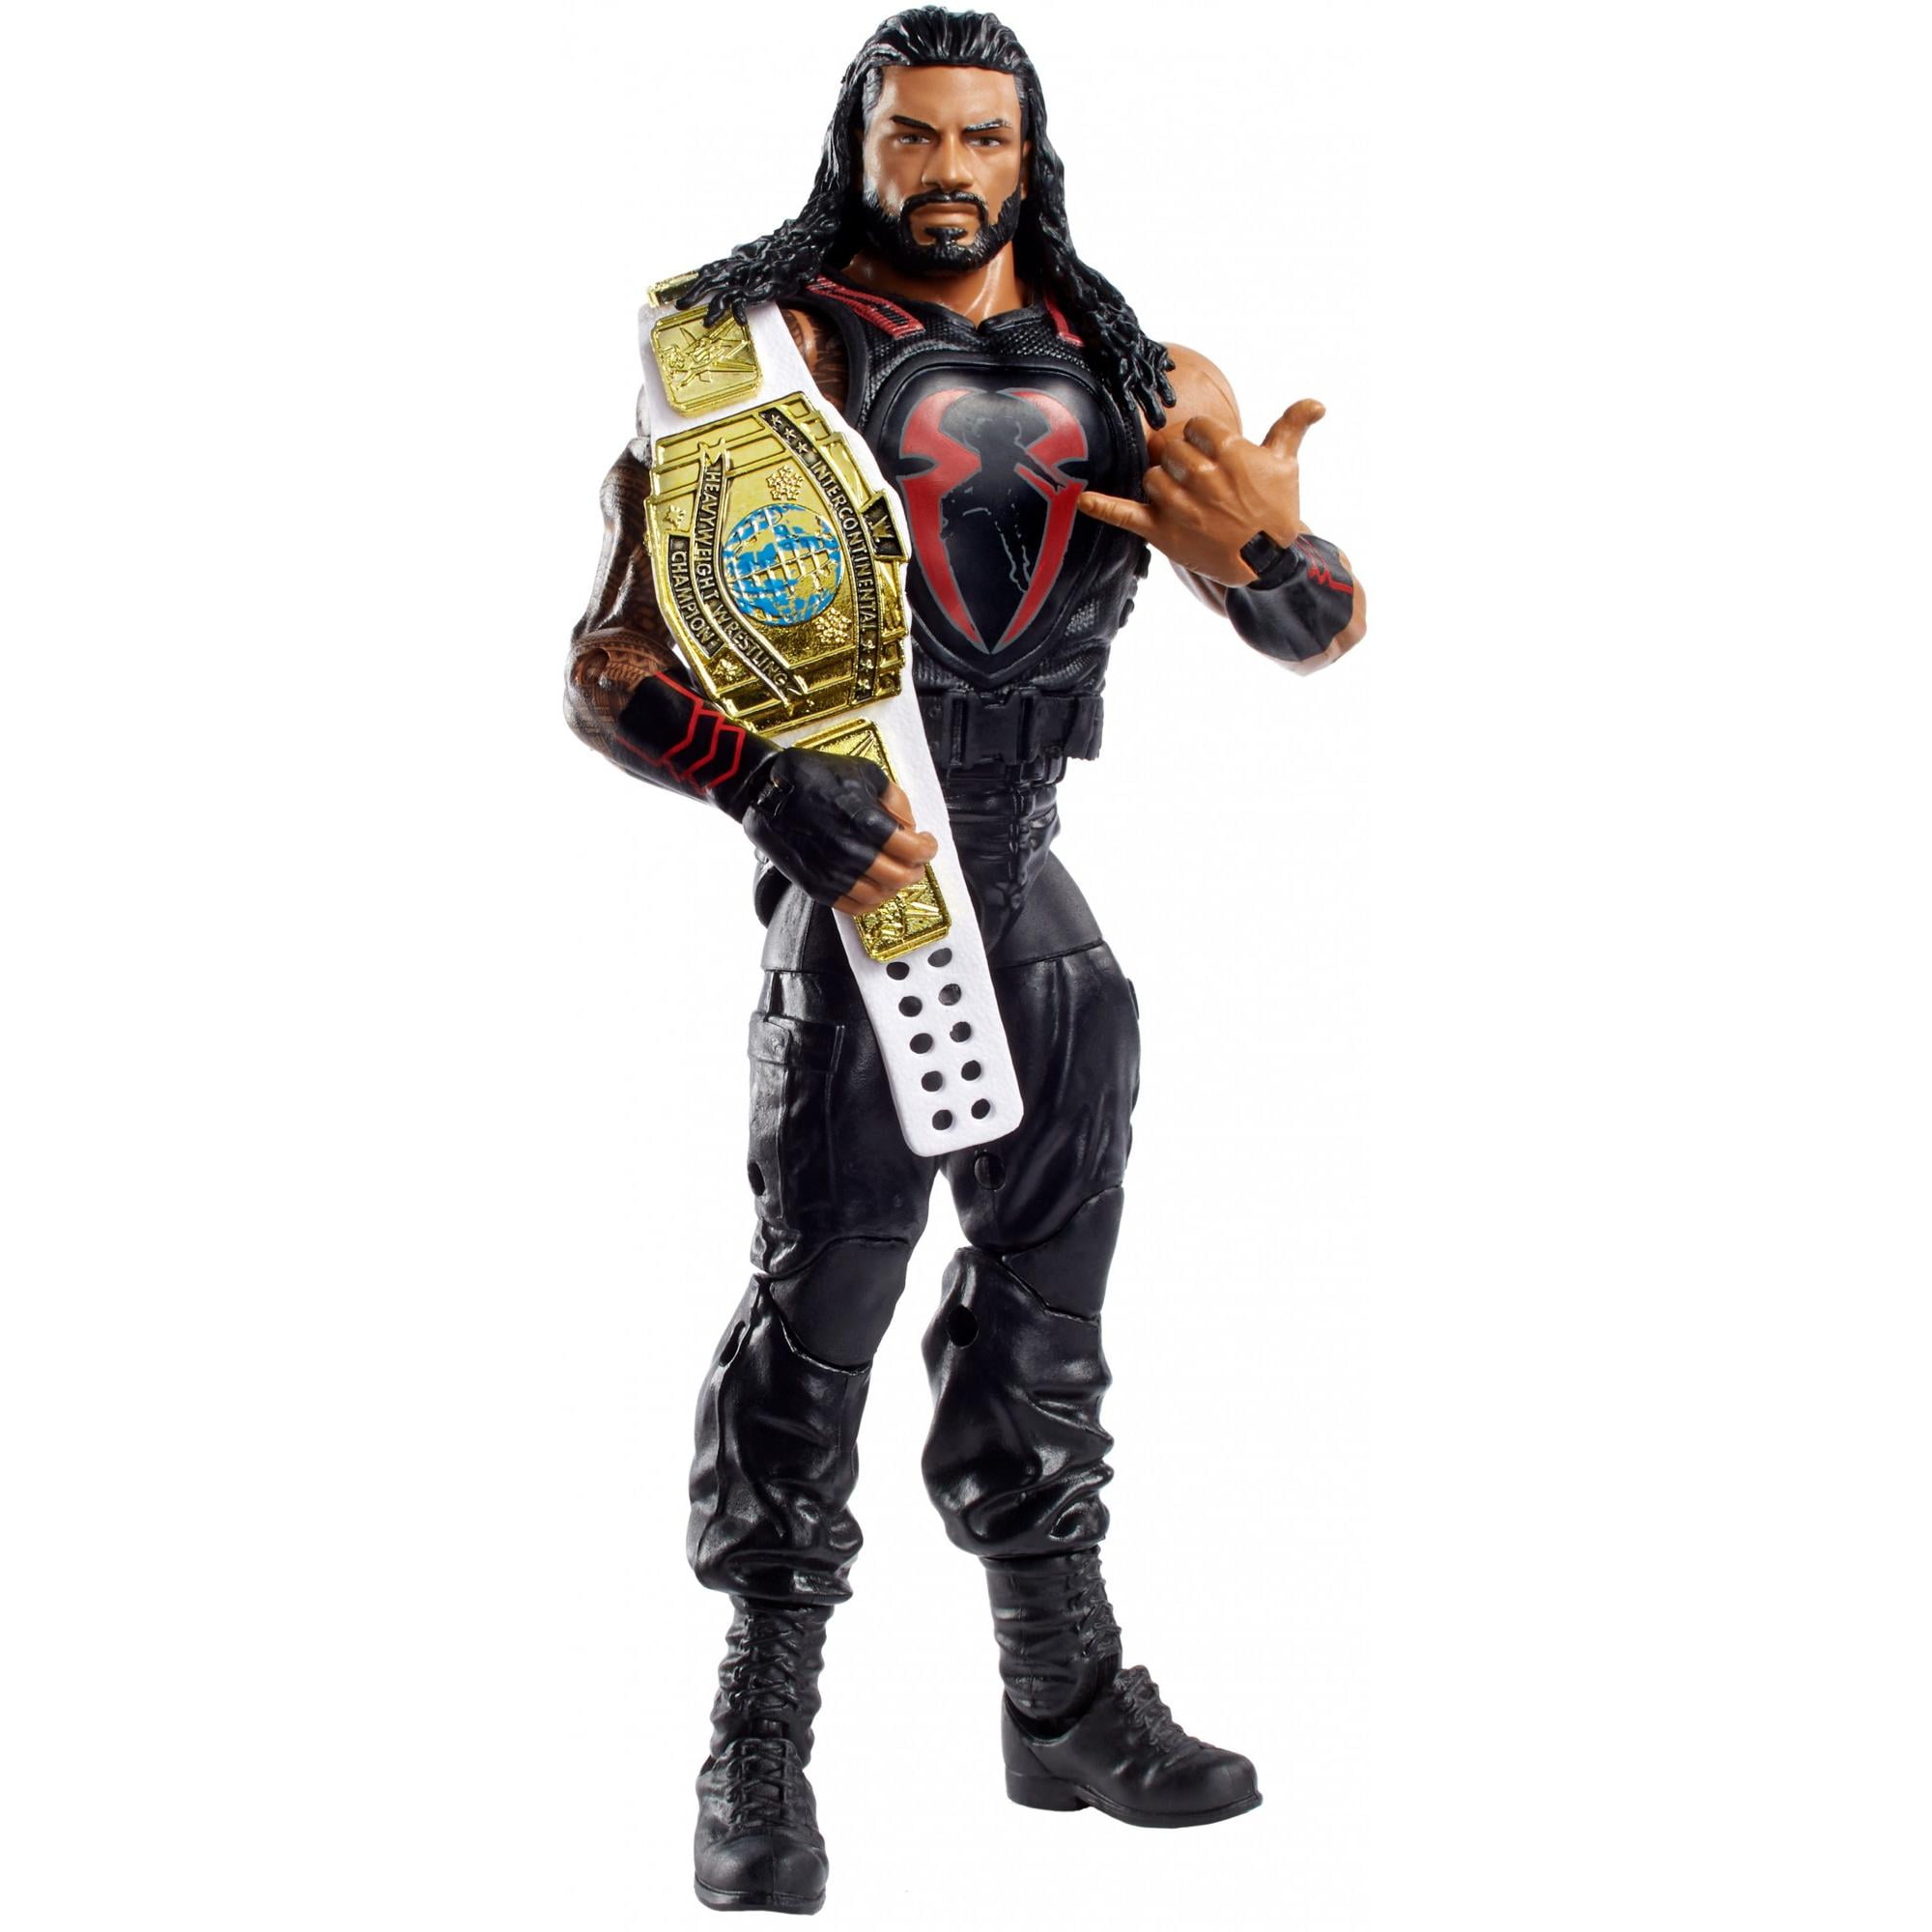 Wwe Elite Collection Roman Reigns Action Figure With Accessories Walmart Com